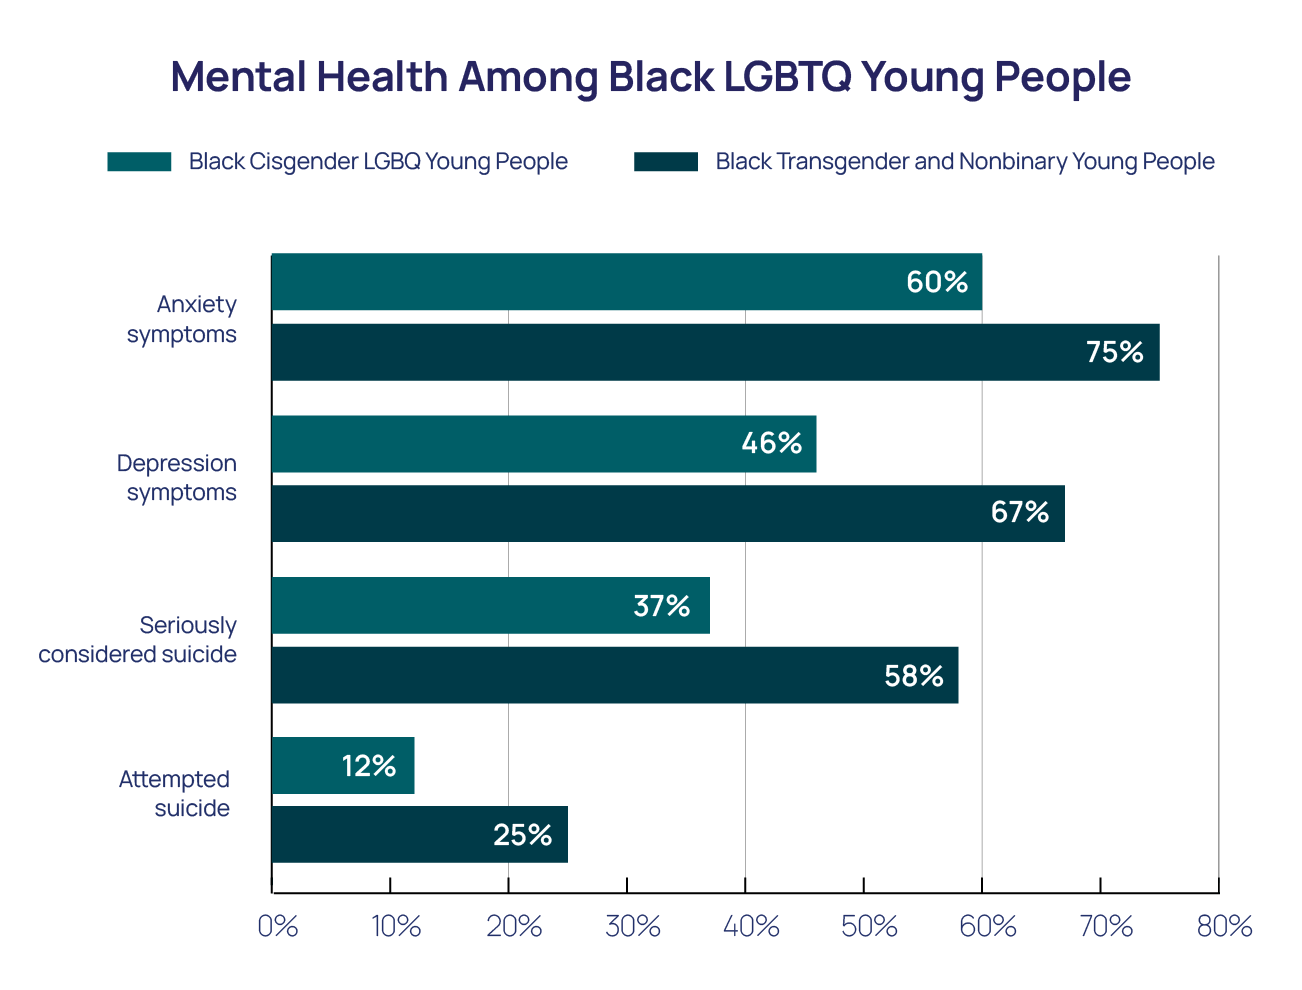 Mental Health of Black Transgender and Nonbinary Young People The